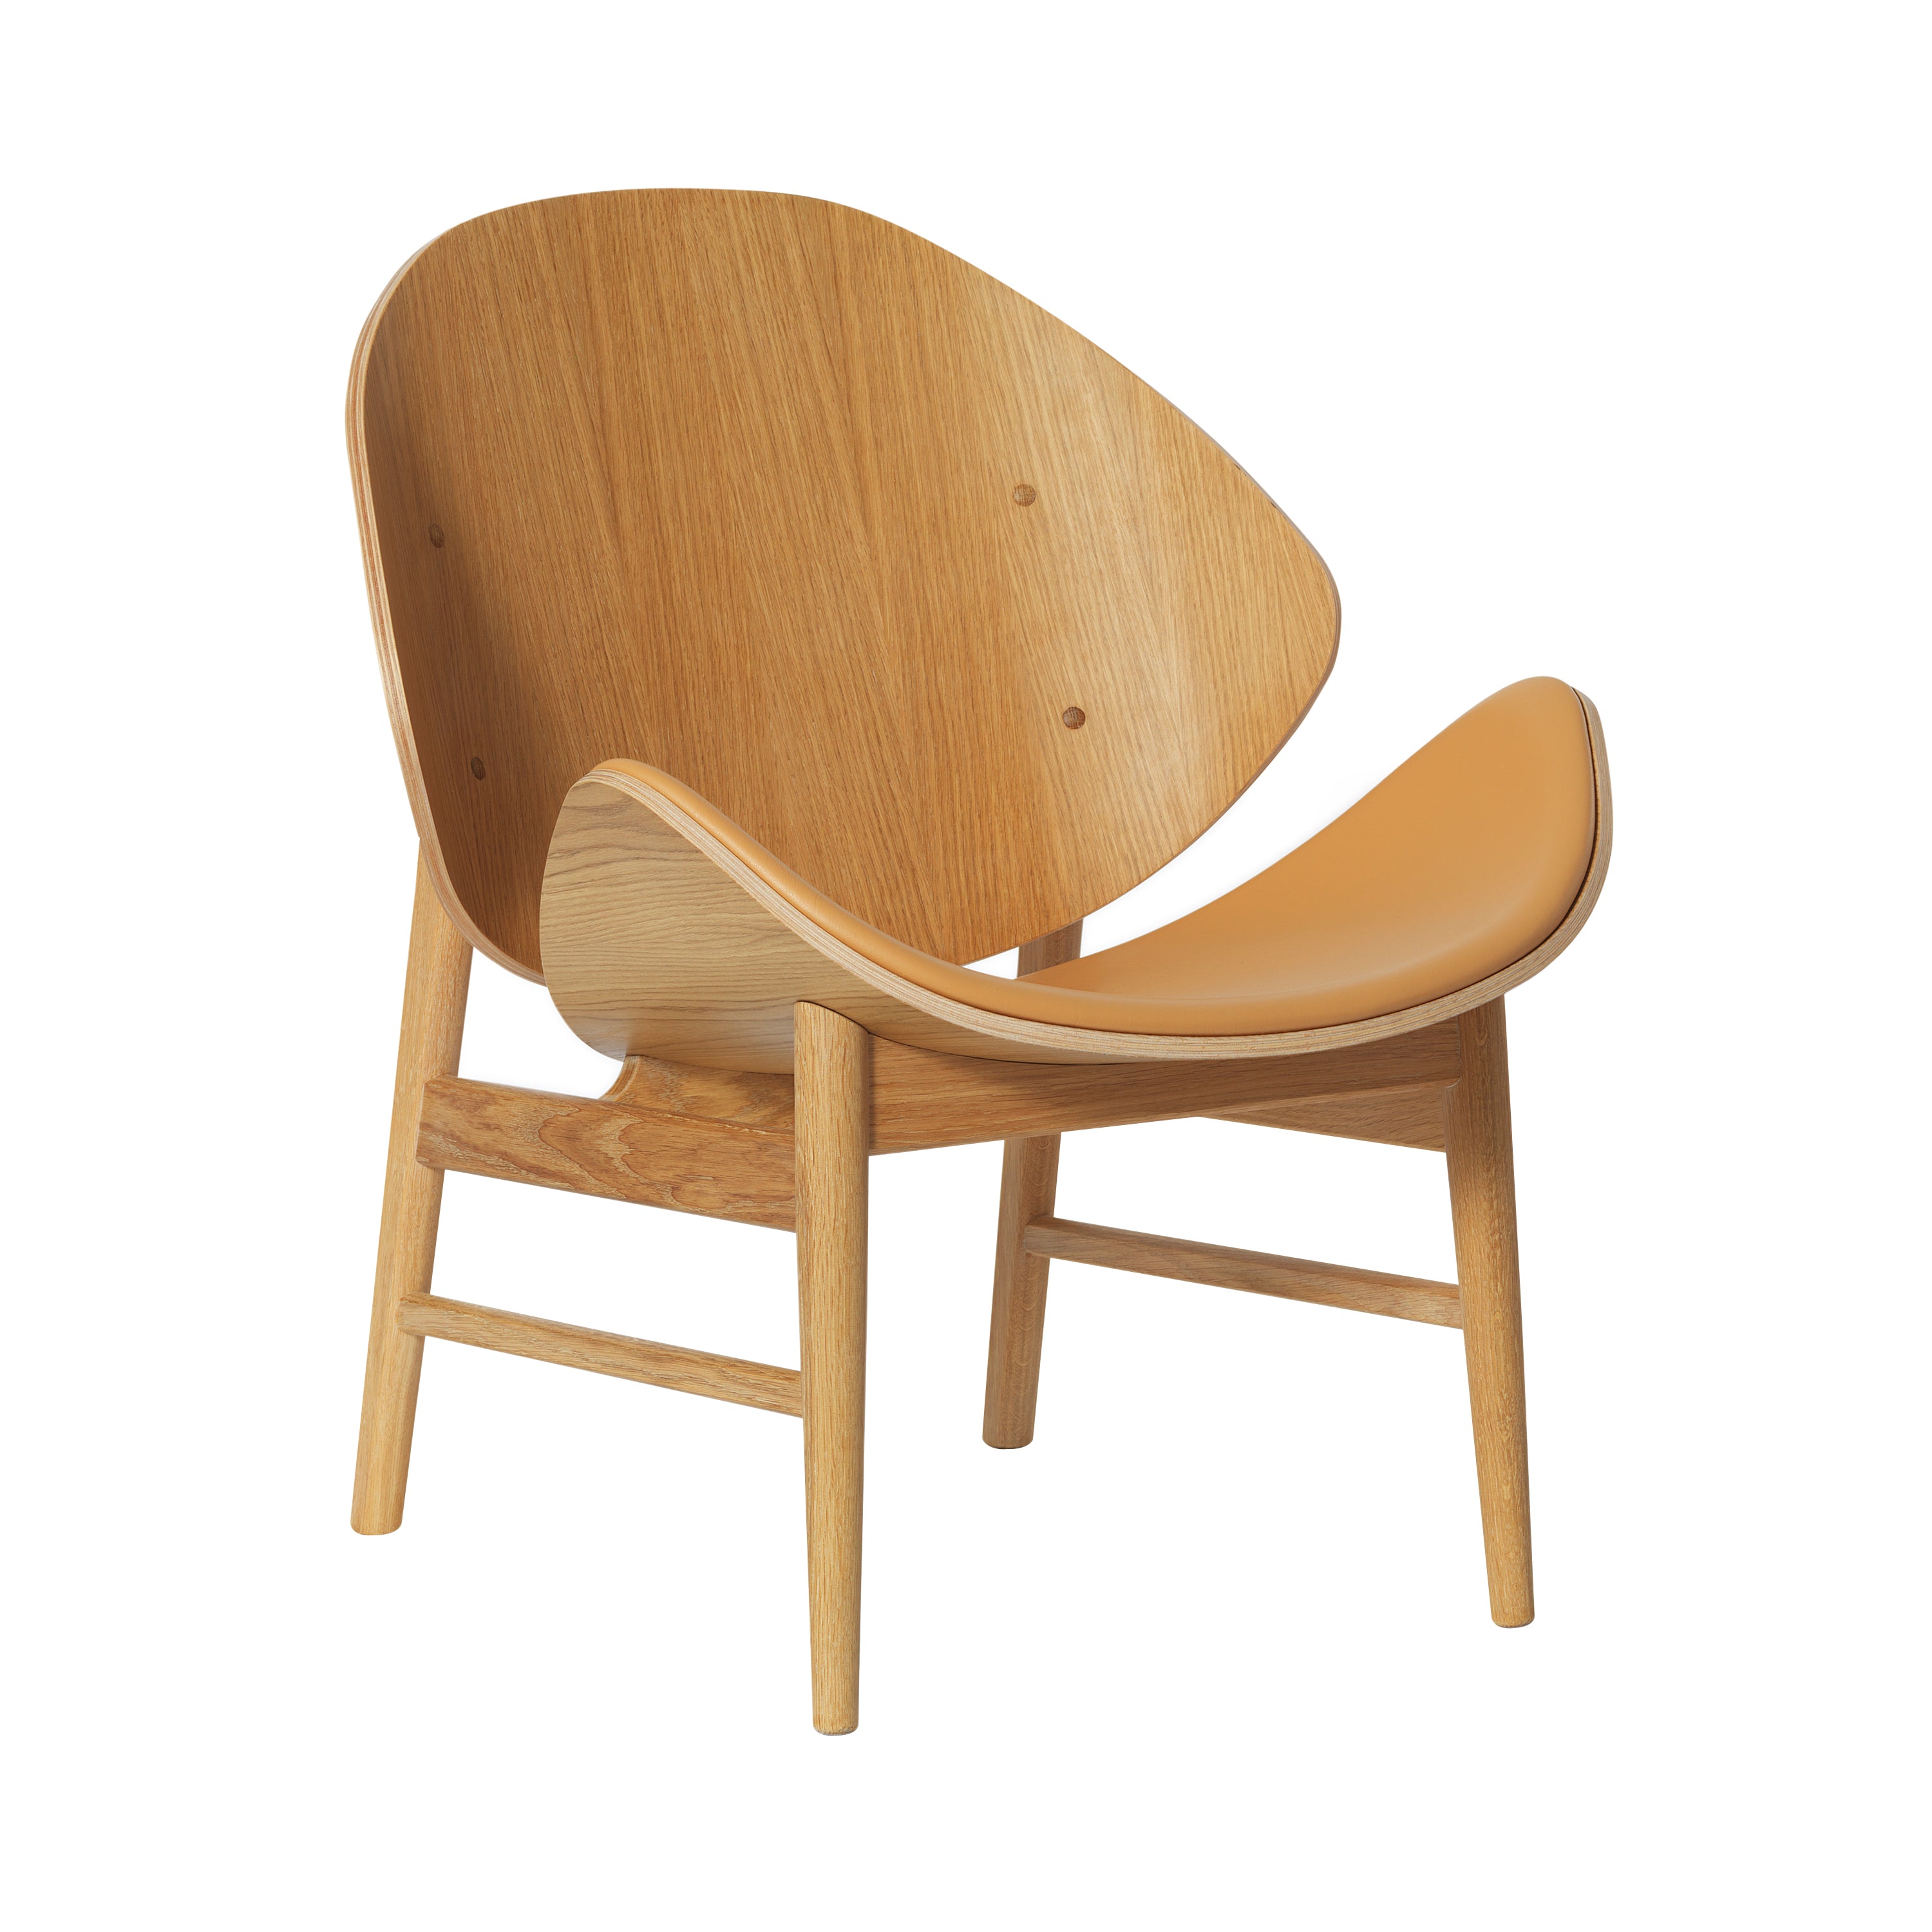 The Orange Lounge Chair: Seat Upholstered + White Oiled Oak